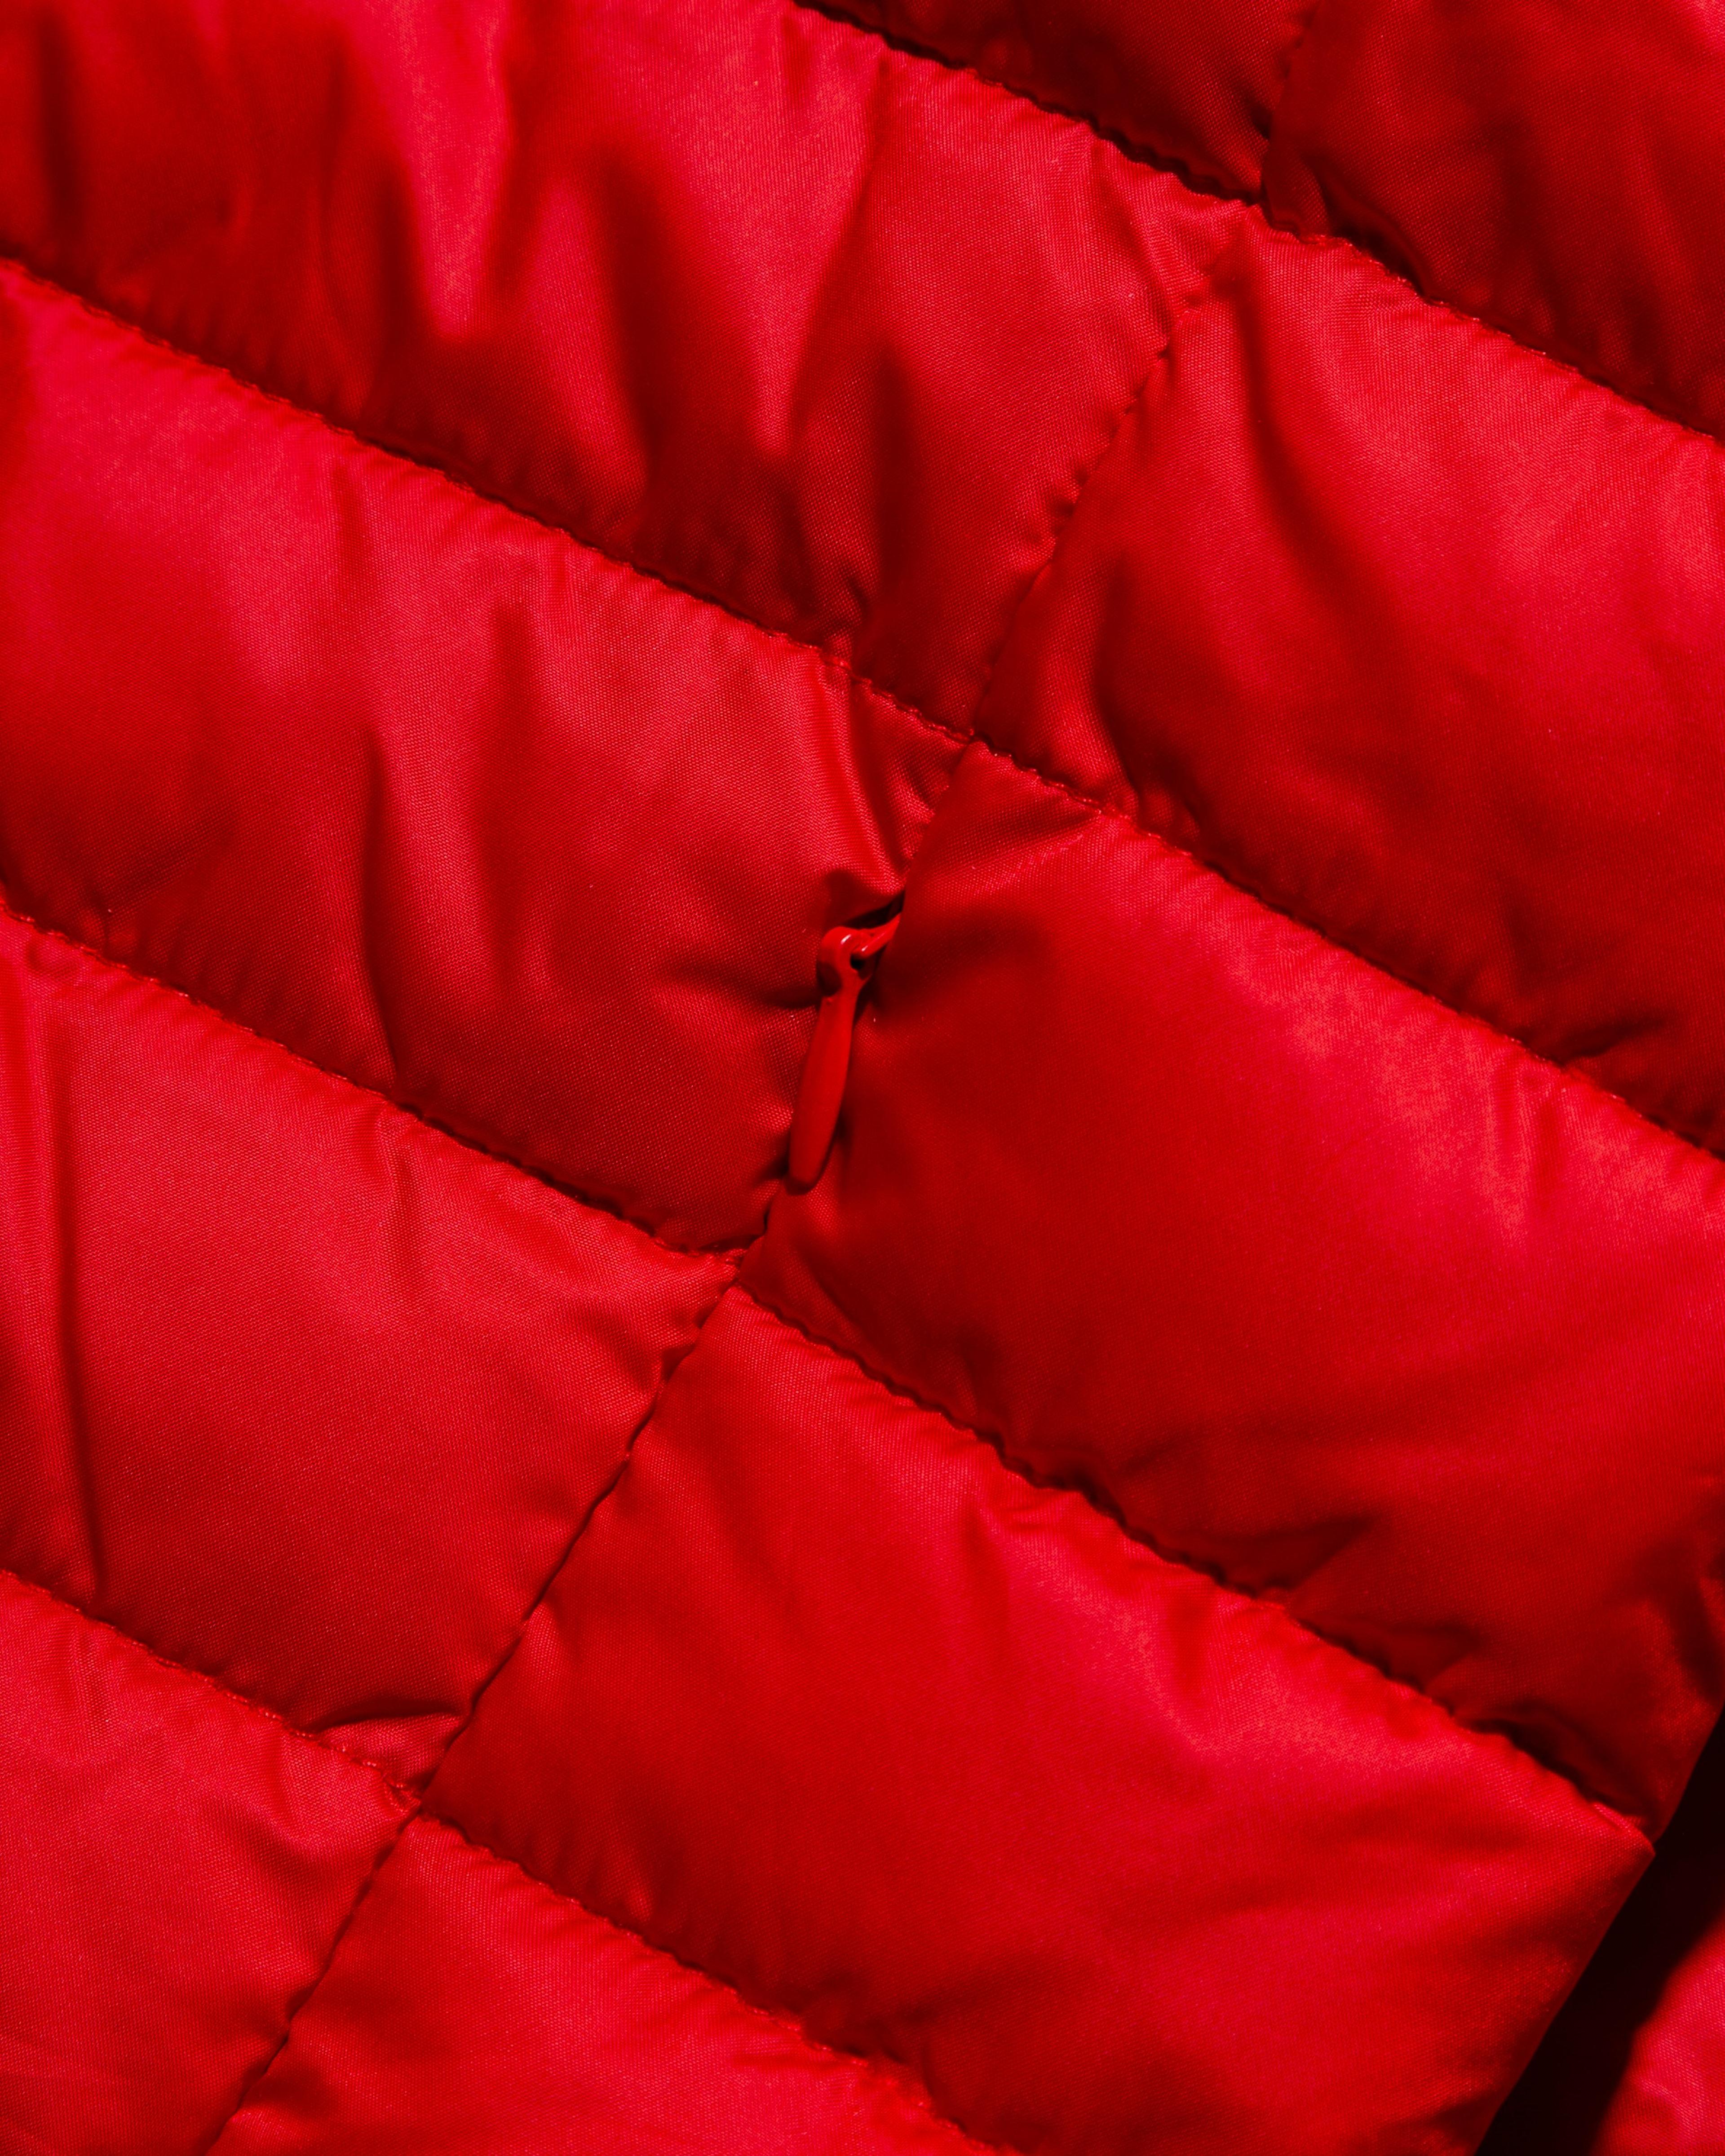 Alternate View 8 of HYPE RED MEN'S PUFFER JACKET